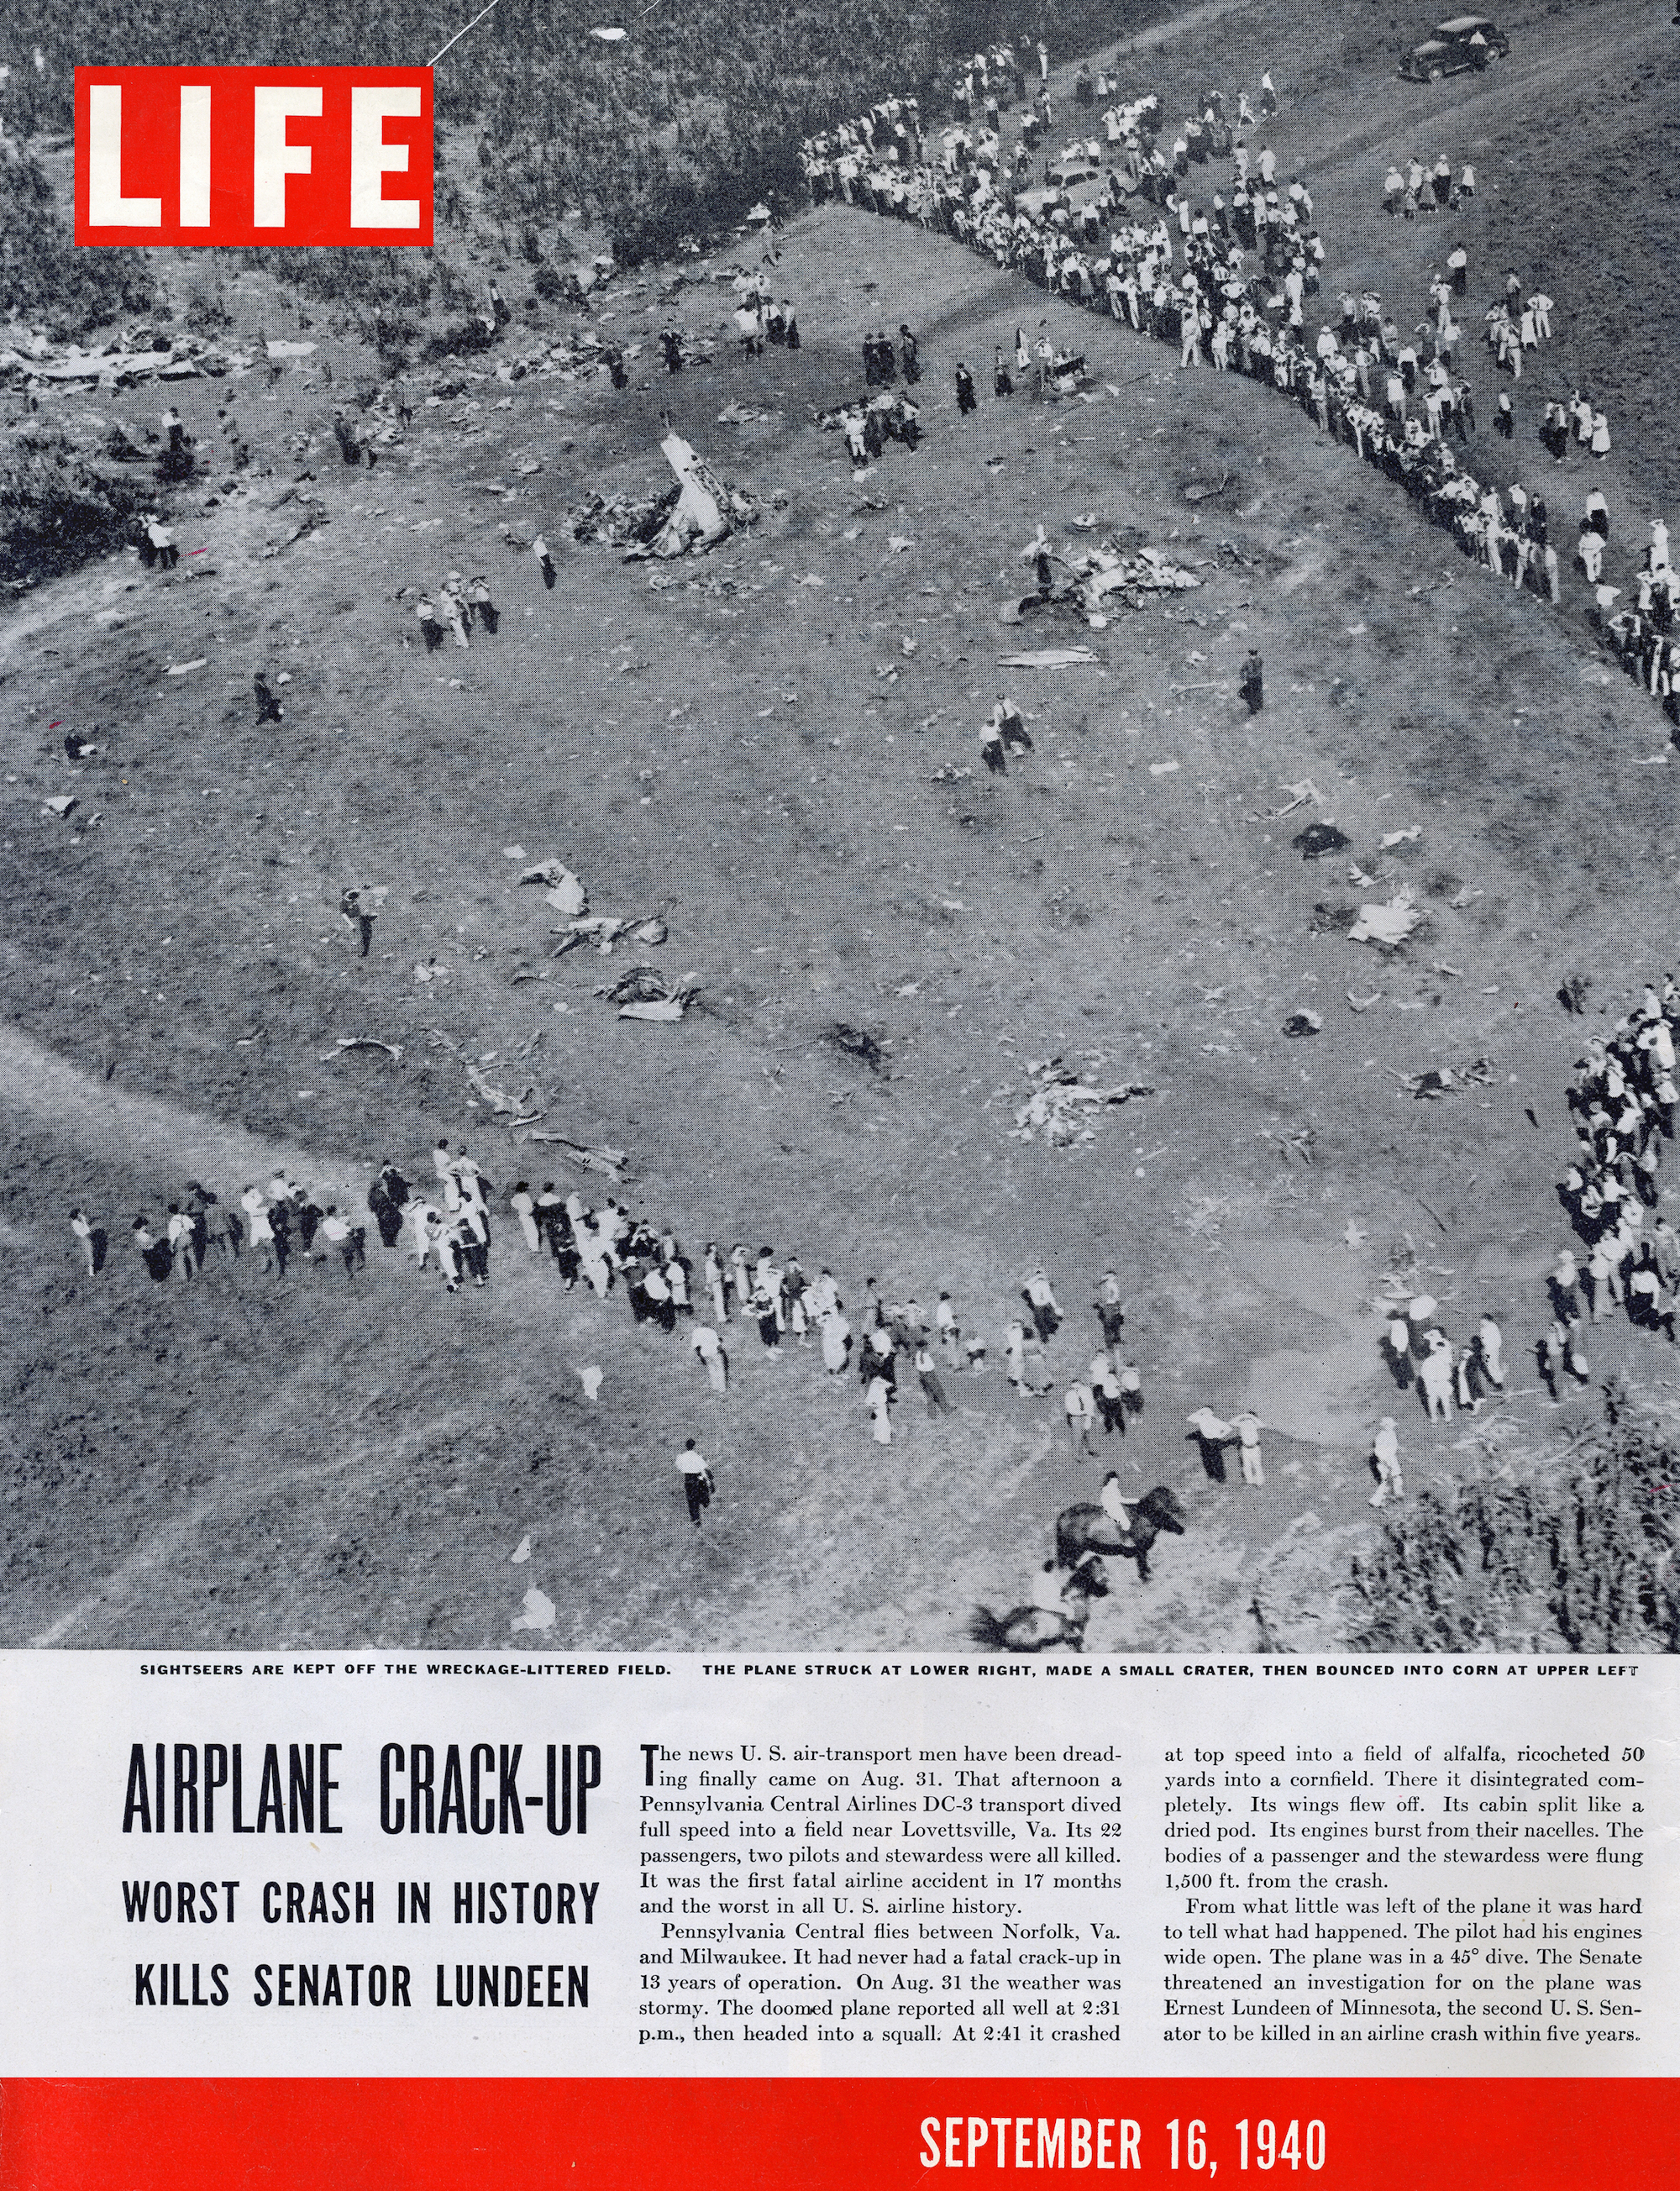 1940-09-16-life-magazine-with-article-on-lovettsville-air-crash-10x13-inches-200-dpi-copy